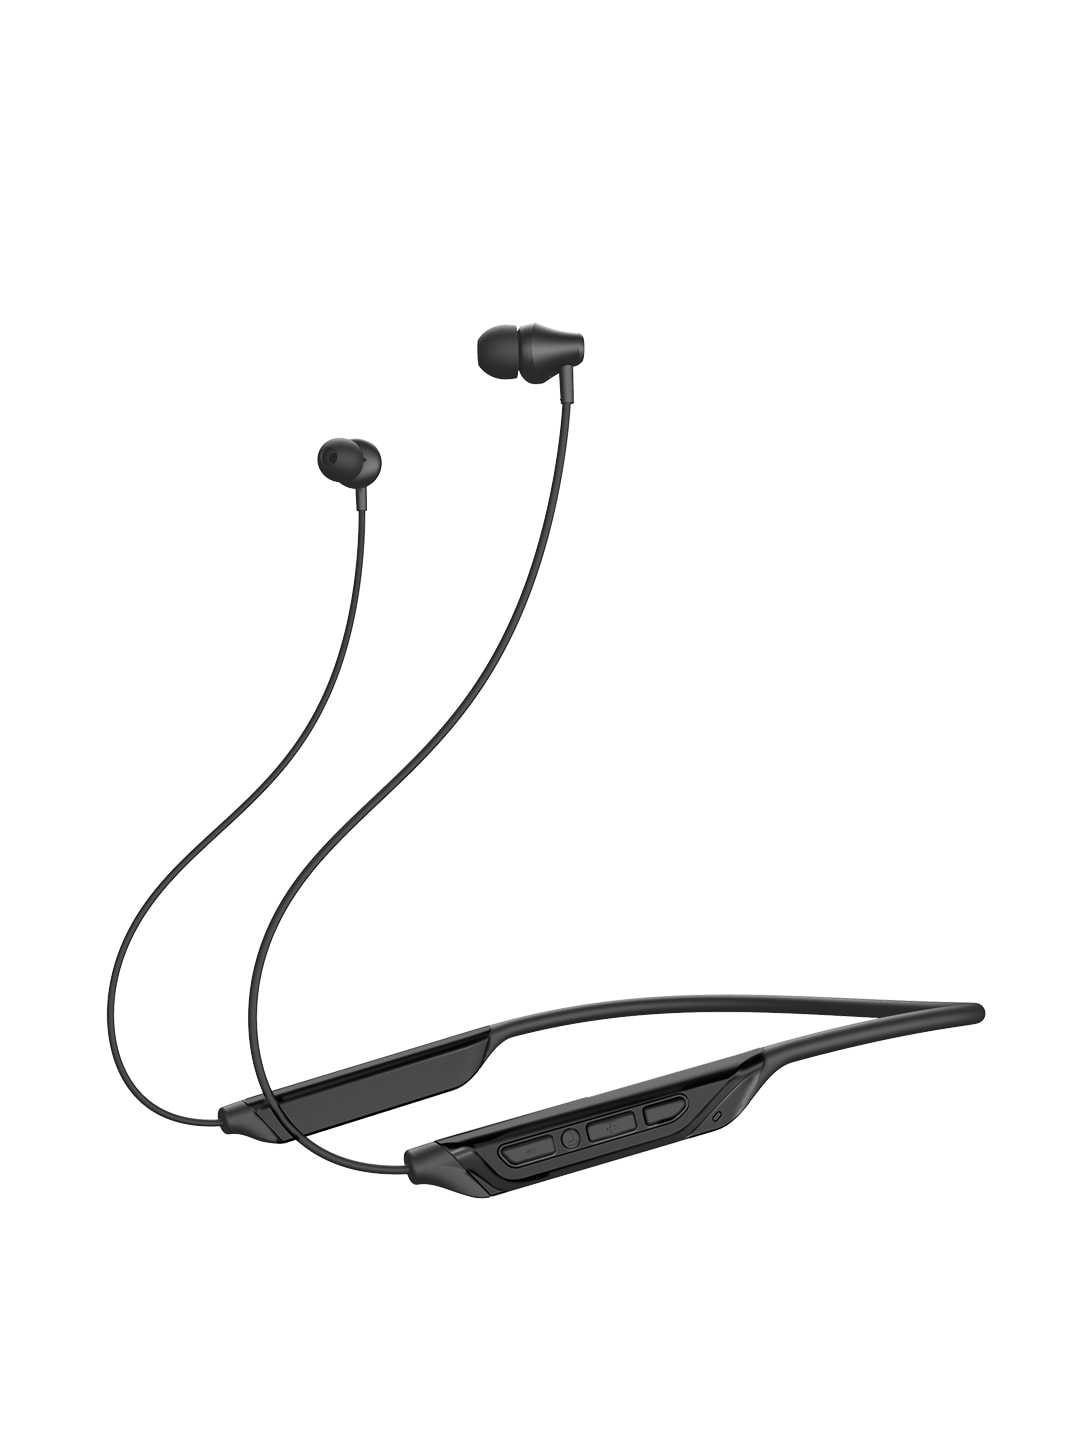 boAt Rockerz 375 M Wireless Bluetooth in Ear Neckband Headphone with Mic - Active Black Price in India